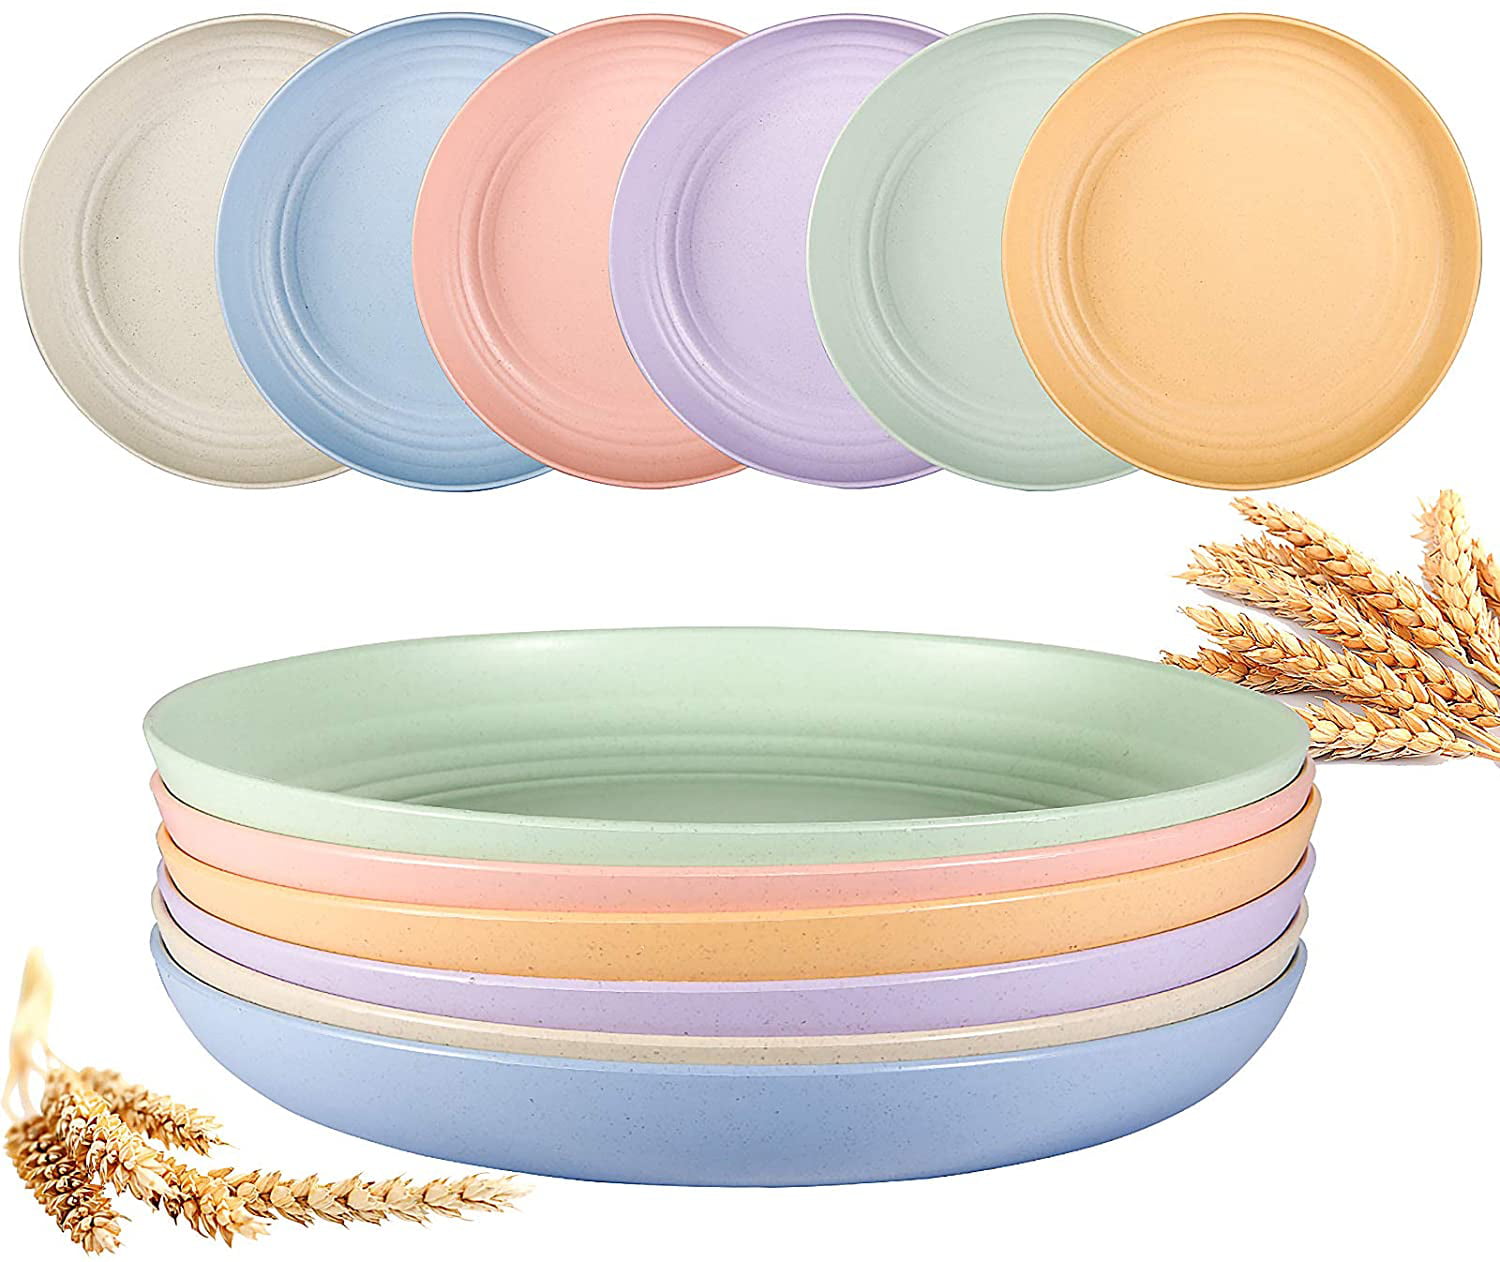 Dinner Plates ECO Friendly Reusable Plastic Plates Dishwasher and Microwave Safe Degradable Wheat Straw Plates 4 Packs, Extra Large Unbreakable Dinnerware Set 